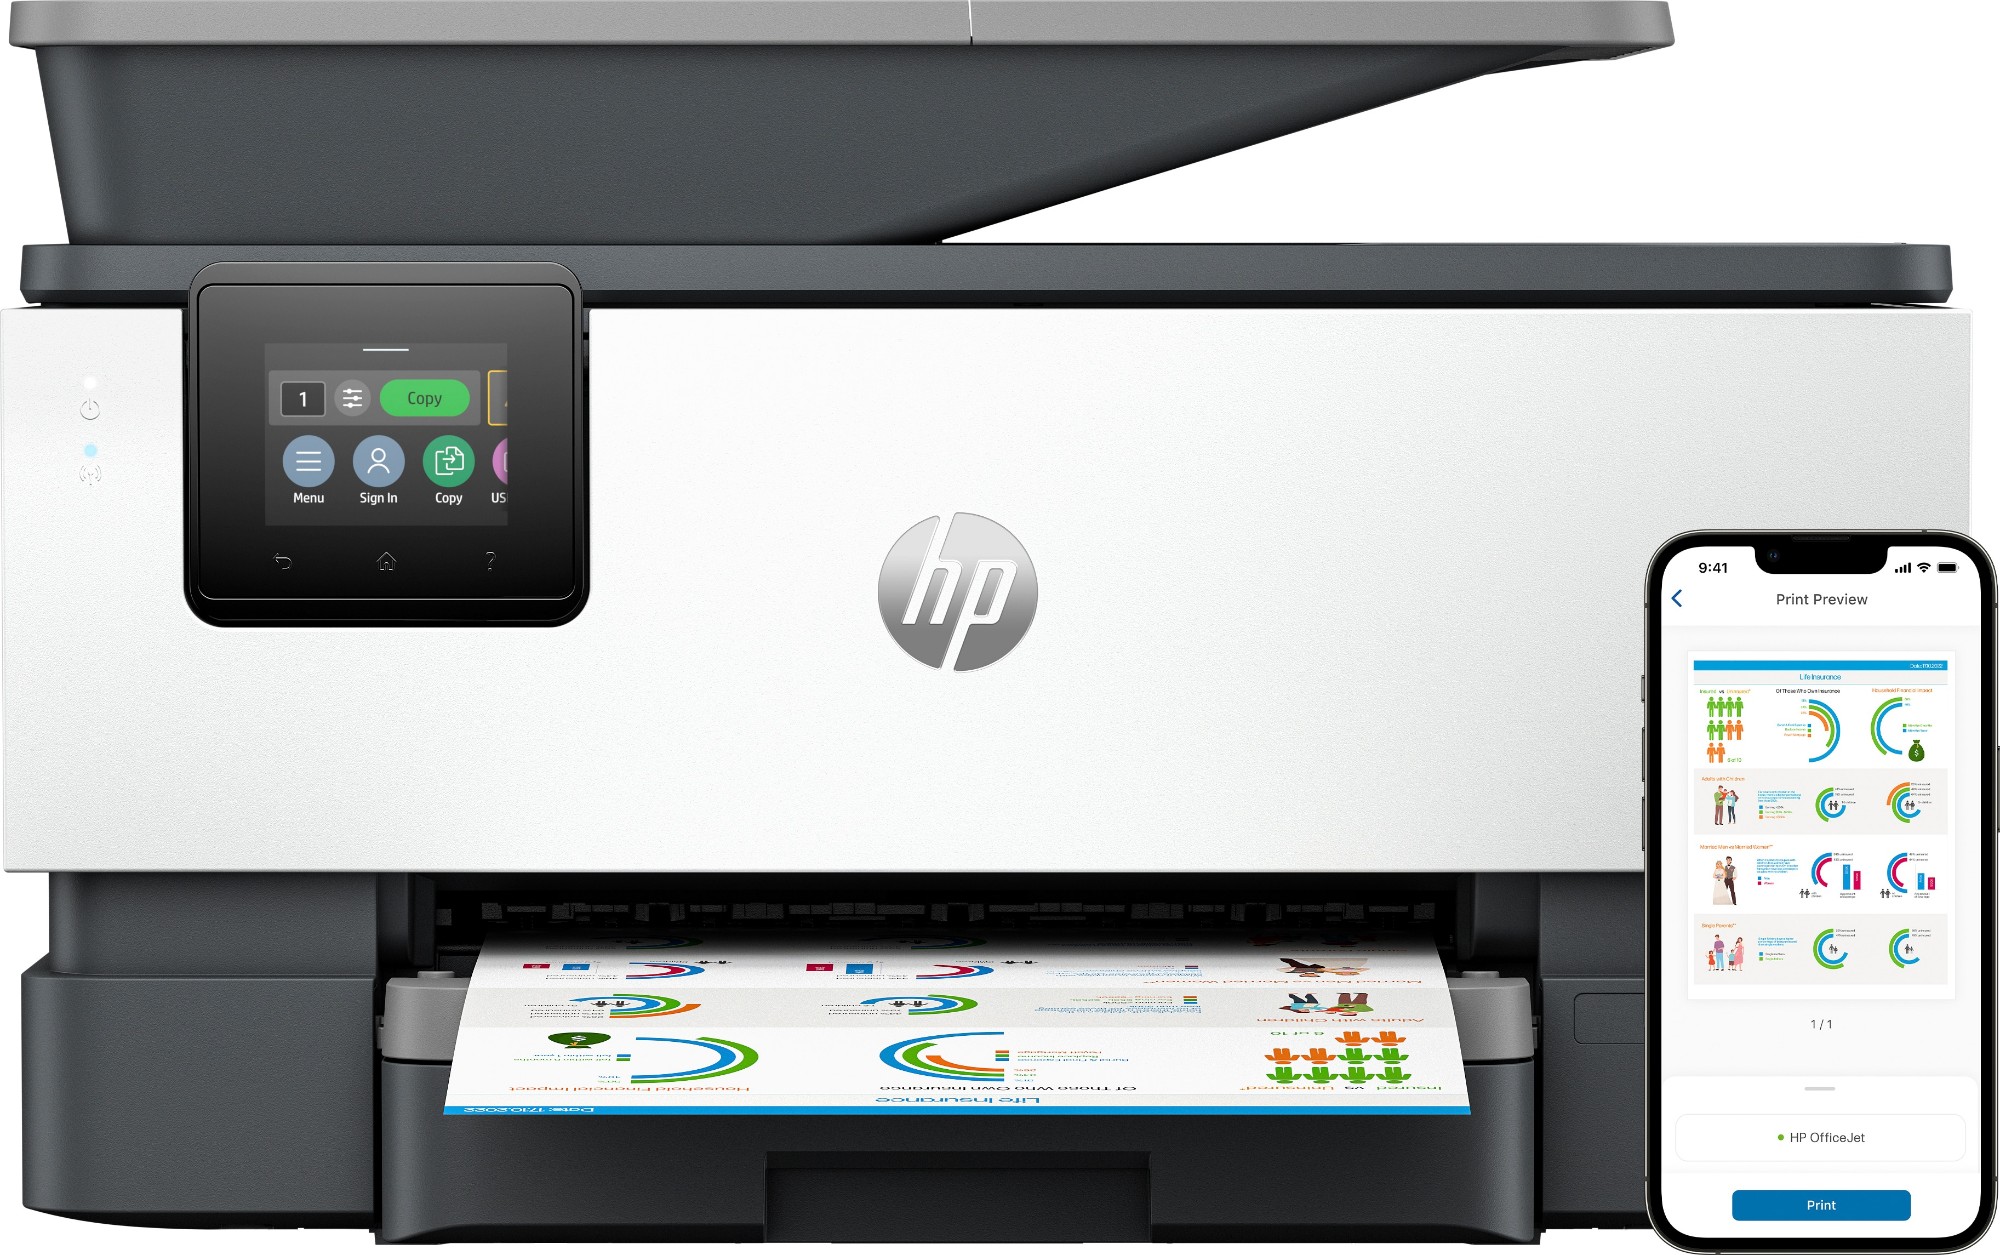 HP OfficeJet Pro HP 9125e All-in-One Printer, Colour, Printer for Small medium business, Print, copy, scan, fax, HP+; HP Instant Ink eligible; Print from phone or tablet; Touchscreen; Smart Advance Scan; Instant Paper; Front USB flash drive port; Two-side